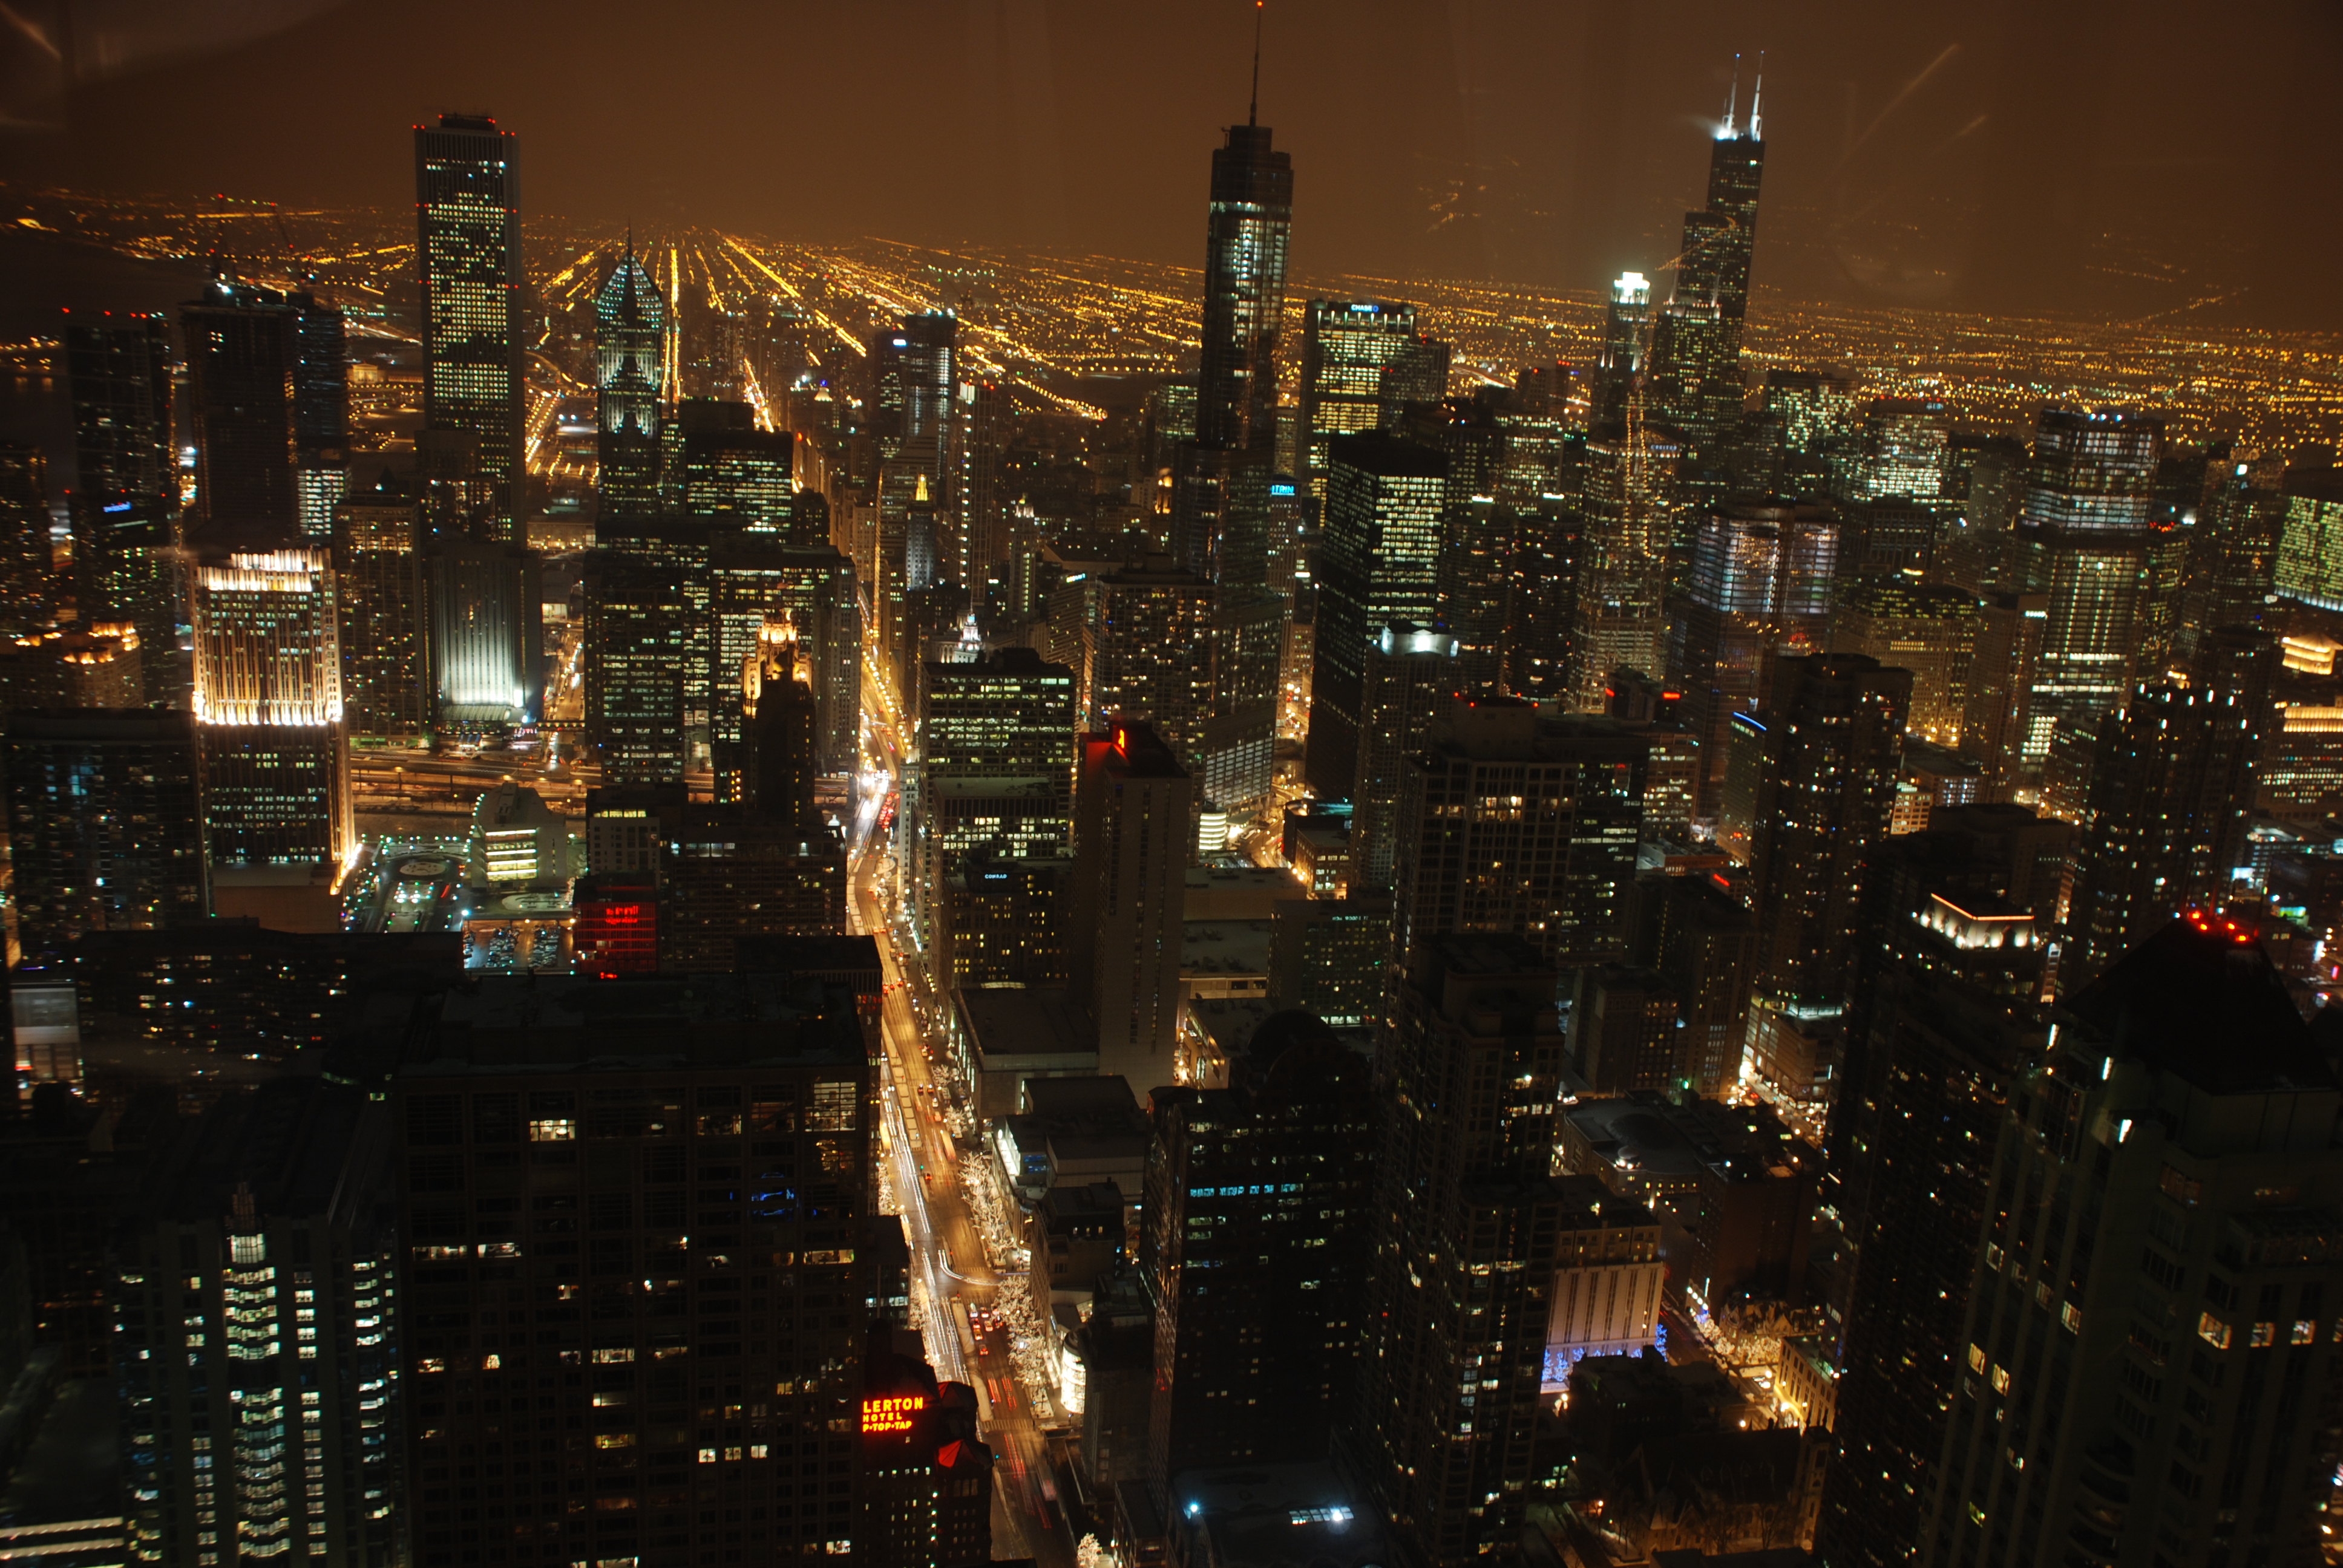 File:Chicago by night.jpg - Wikimedia Commons